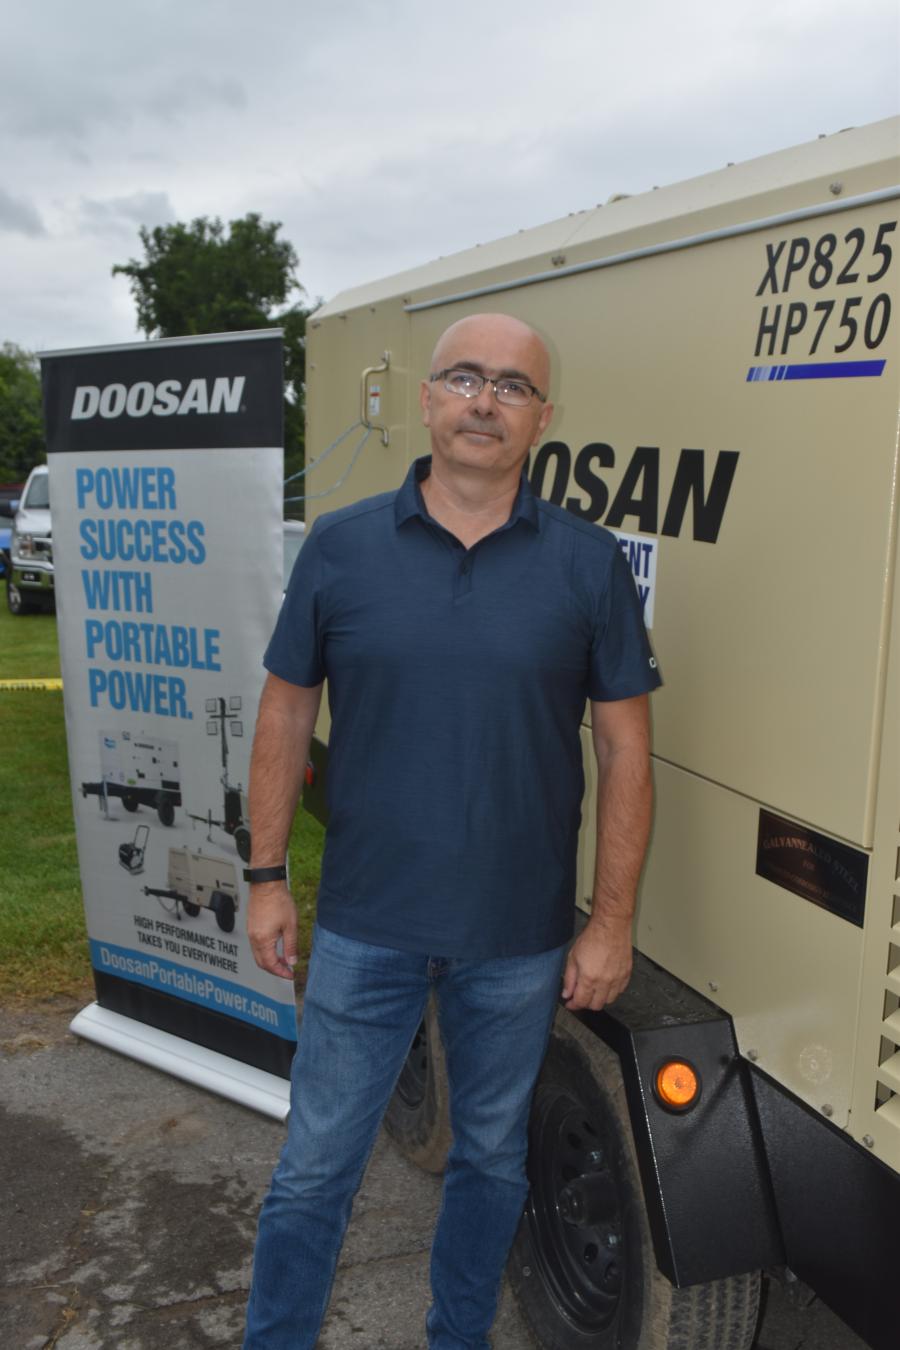 Darko Ilic, district sales manager of Doosan Portable Power, discusses the various sizes and options of portable power plants and light towers from Doosan.
(CEG photo)